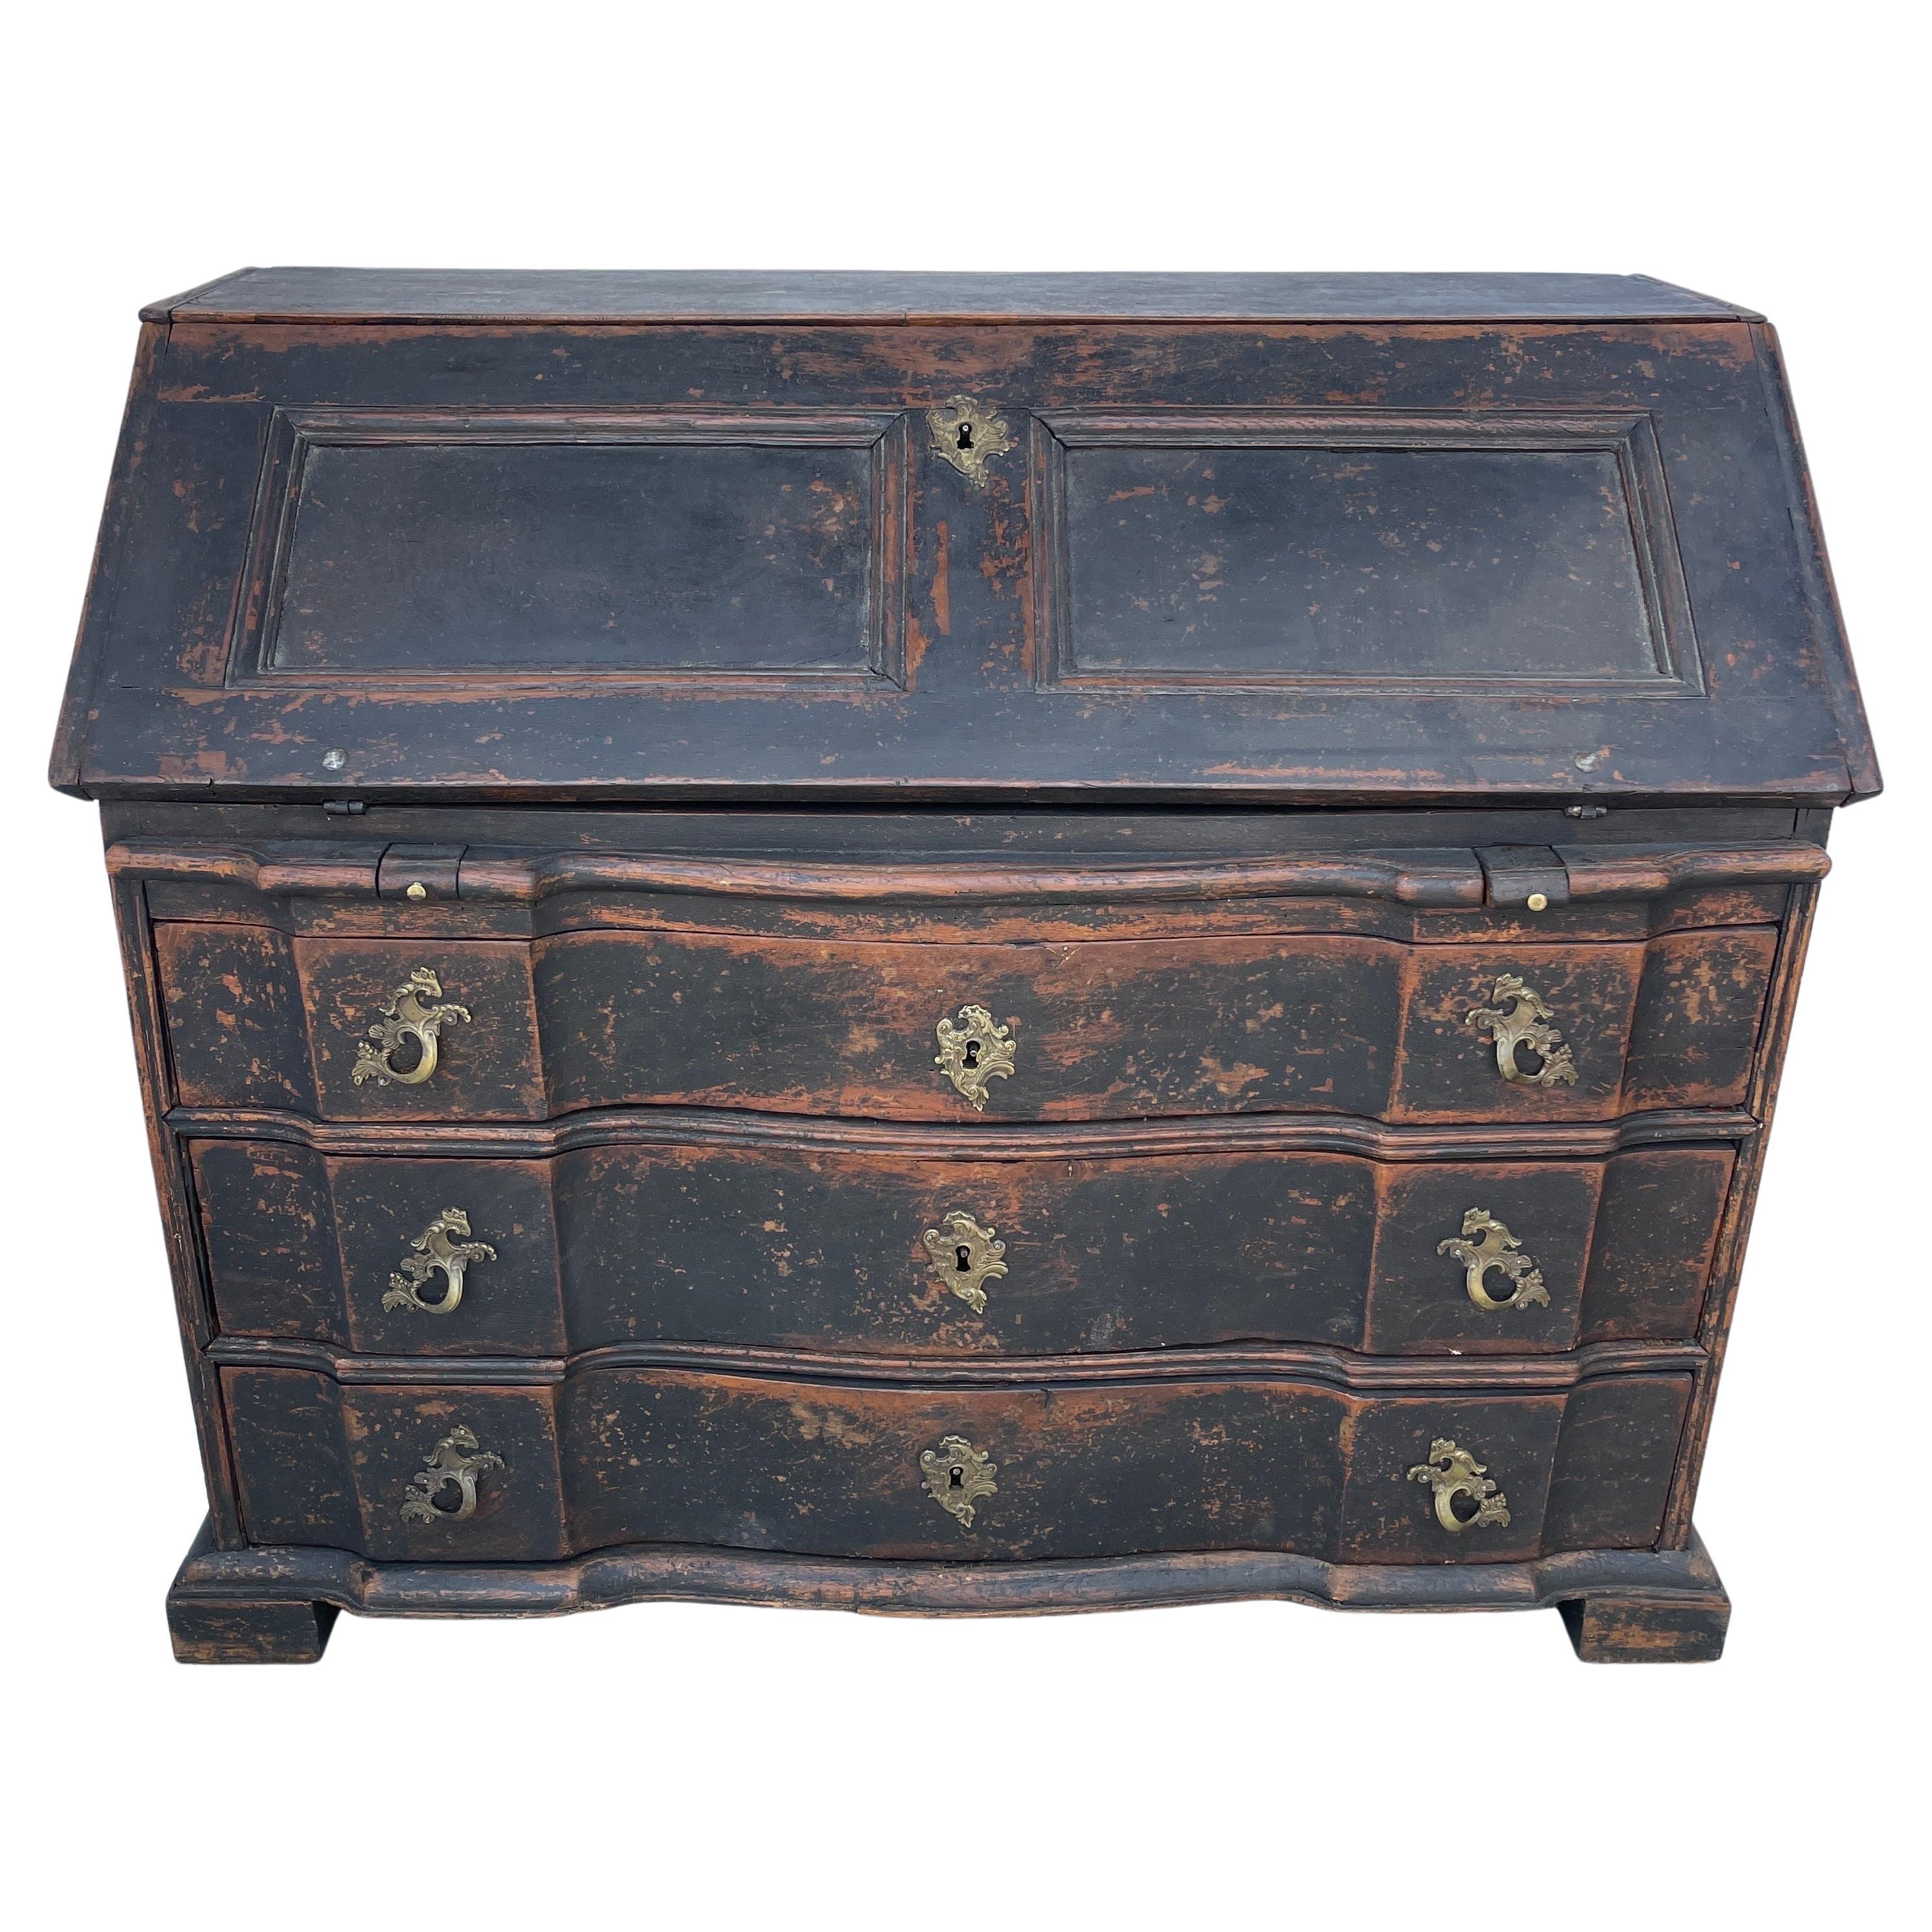 Period Danish Black Painted Gustavian Style Writing Desk Secretary. Refinished in painted black with pull down desk area and multiple drawers that vary in size. The brass hardware elevate this particular piece. Wonderful secretary desk for any